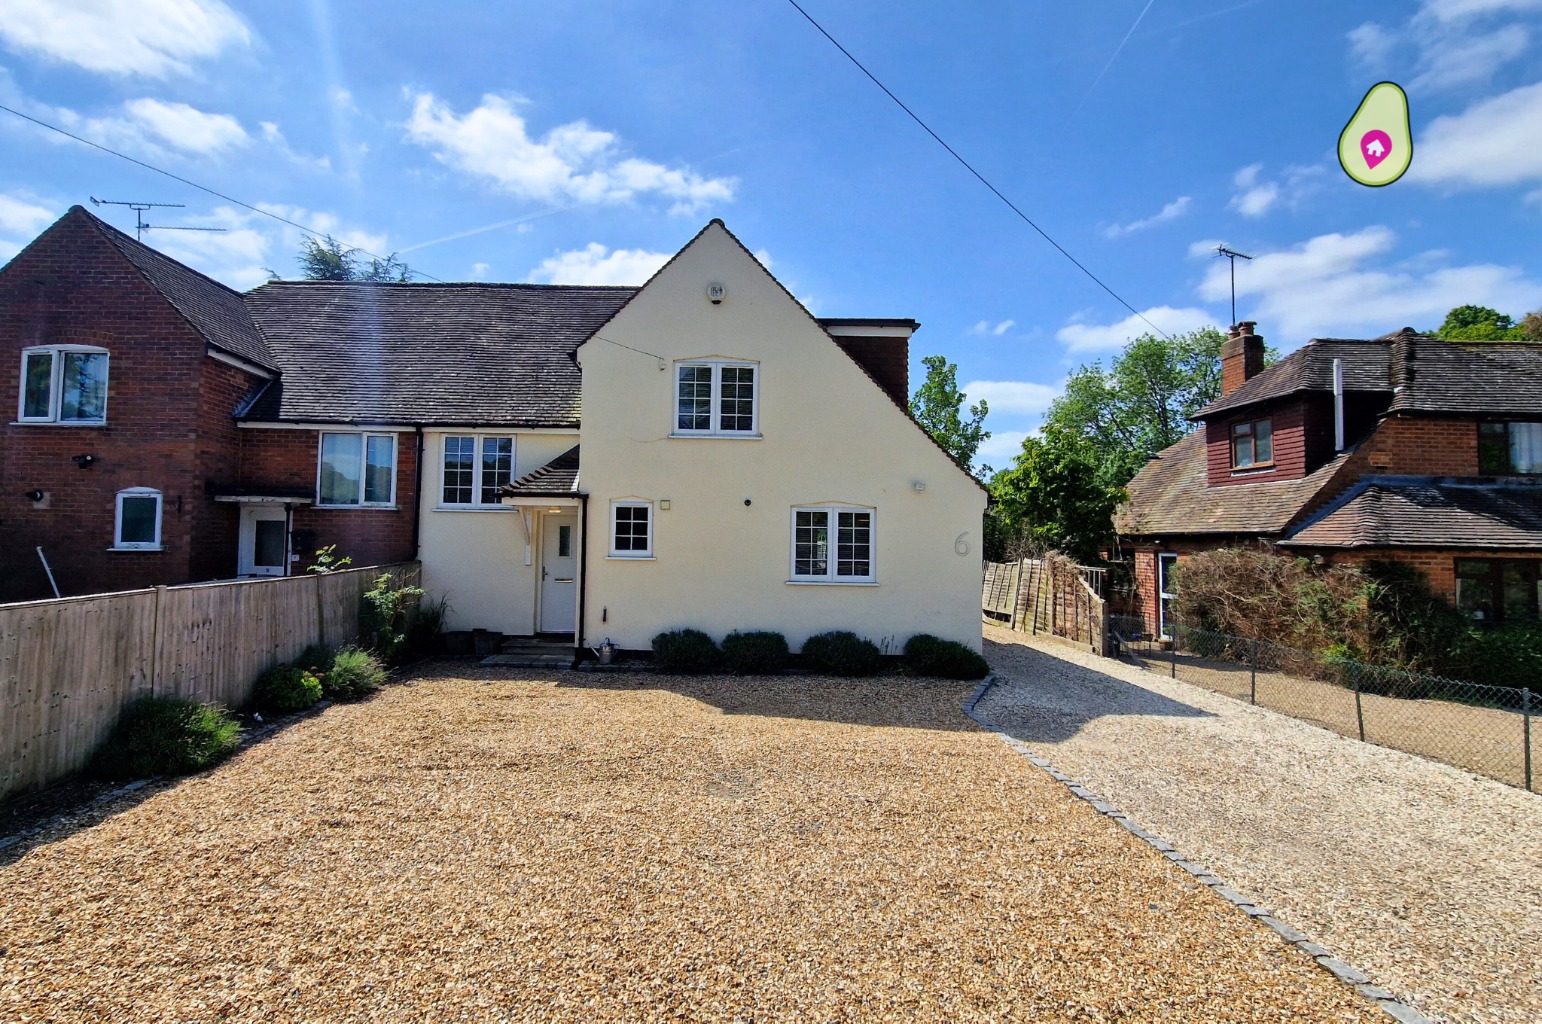 3 bed semi-detached house for sale in The Village, Wokingham - Property Image 1